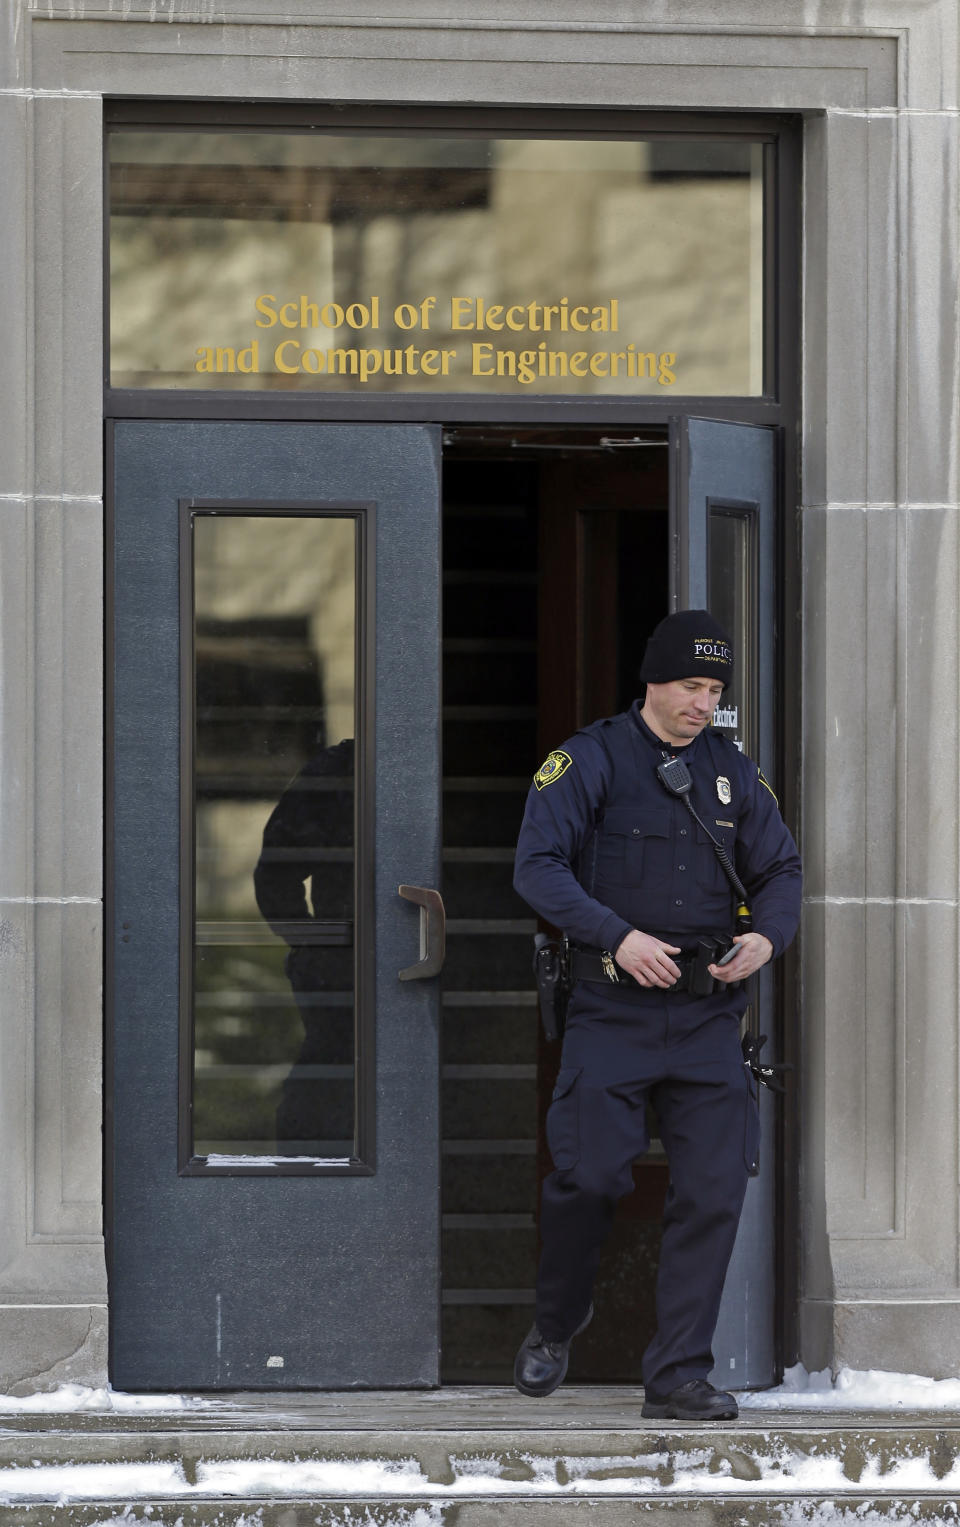 A police officer walks out of the Electrical Engineering Building on the campus of Purdue University in West Lafayette, Ind., Tuesday, Jan. 21, 2014 where one person was killed inside a classroom by a gunman who surrendered to a police officer within minutes of the attack, officials said.. (AP Photo/Michael Conroy)